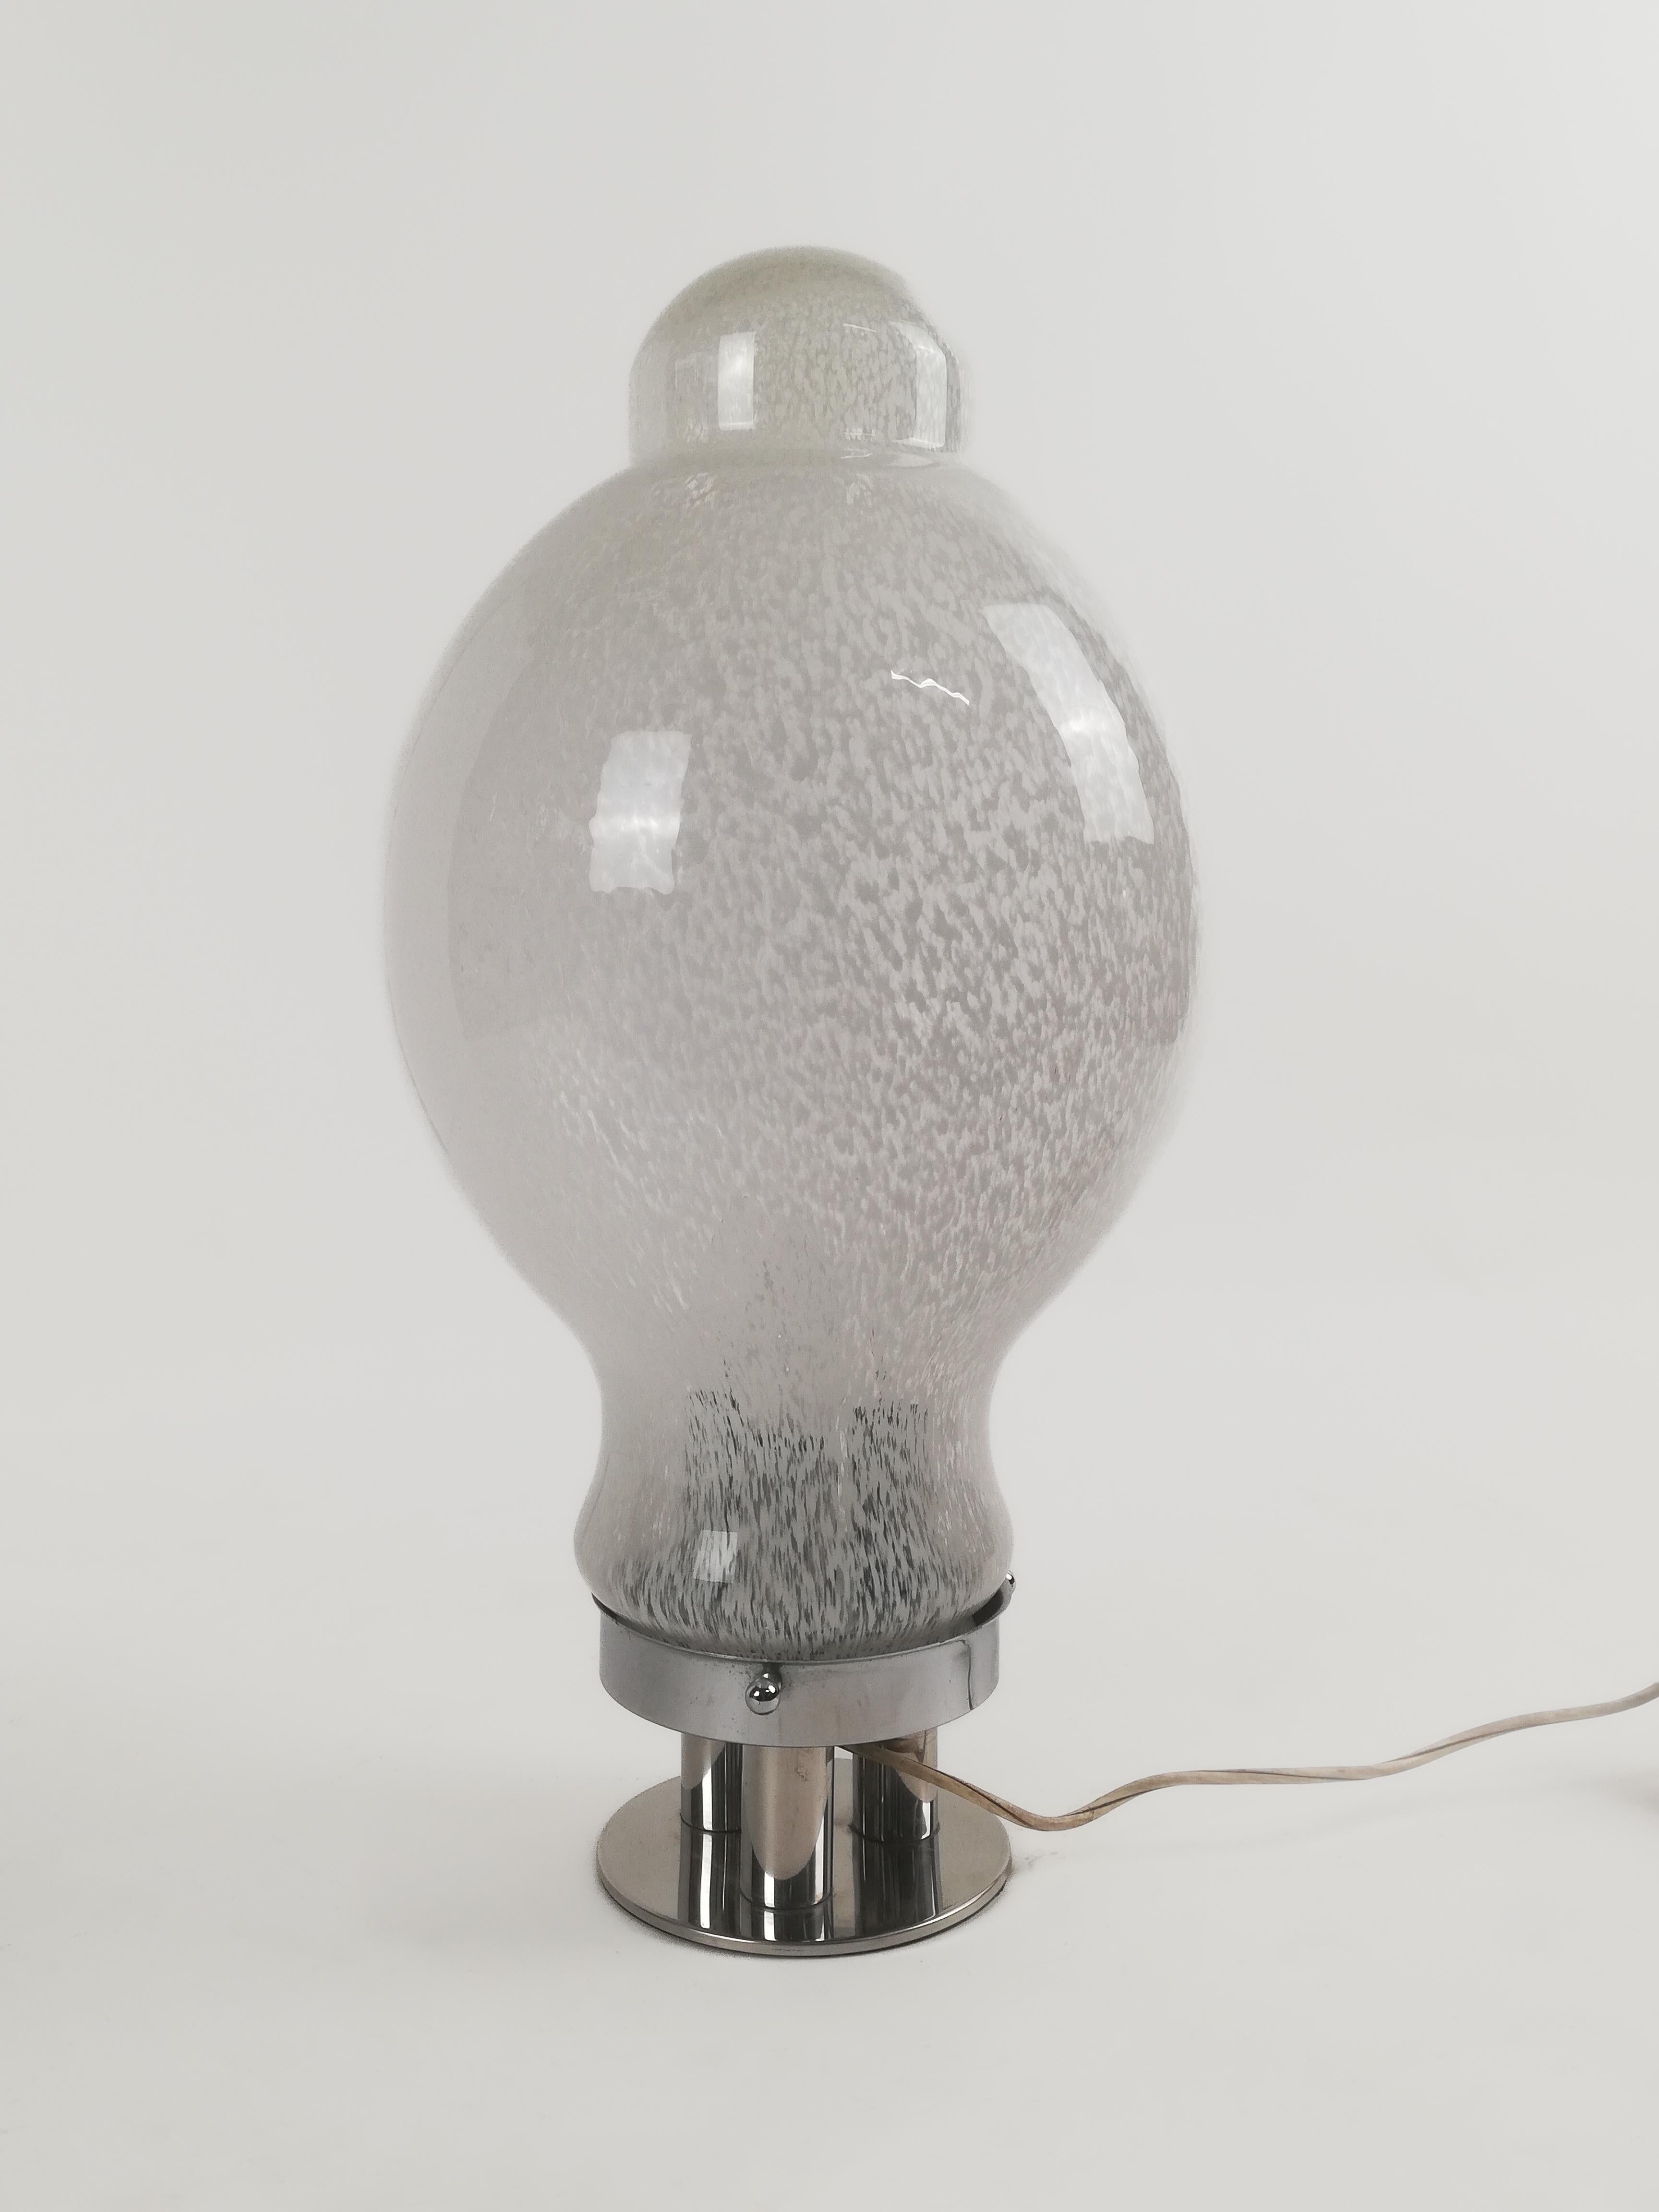 A Splendid giant Italian table lamp made in Murano blown glass and chromed metal.
Datable to around the 1970s, the lamp recalls for design and materials the productions of the historic Venetian company 